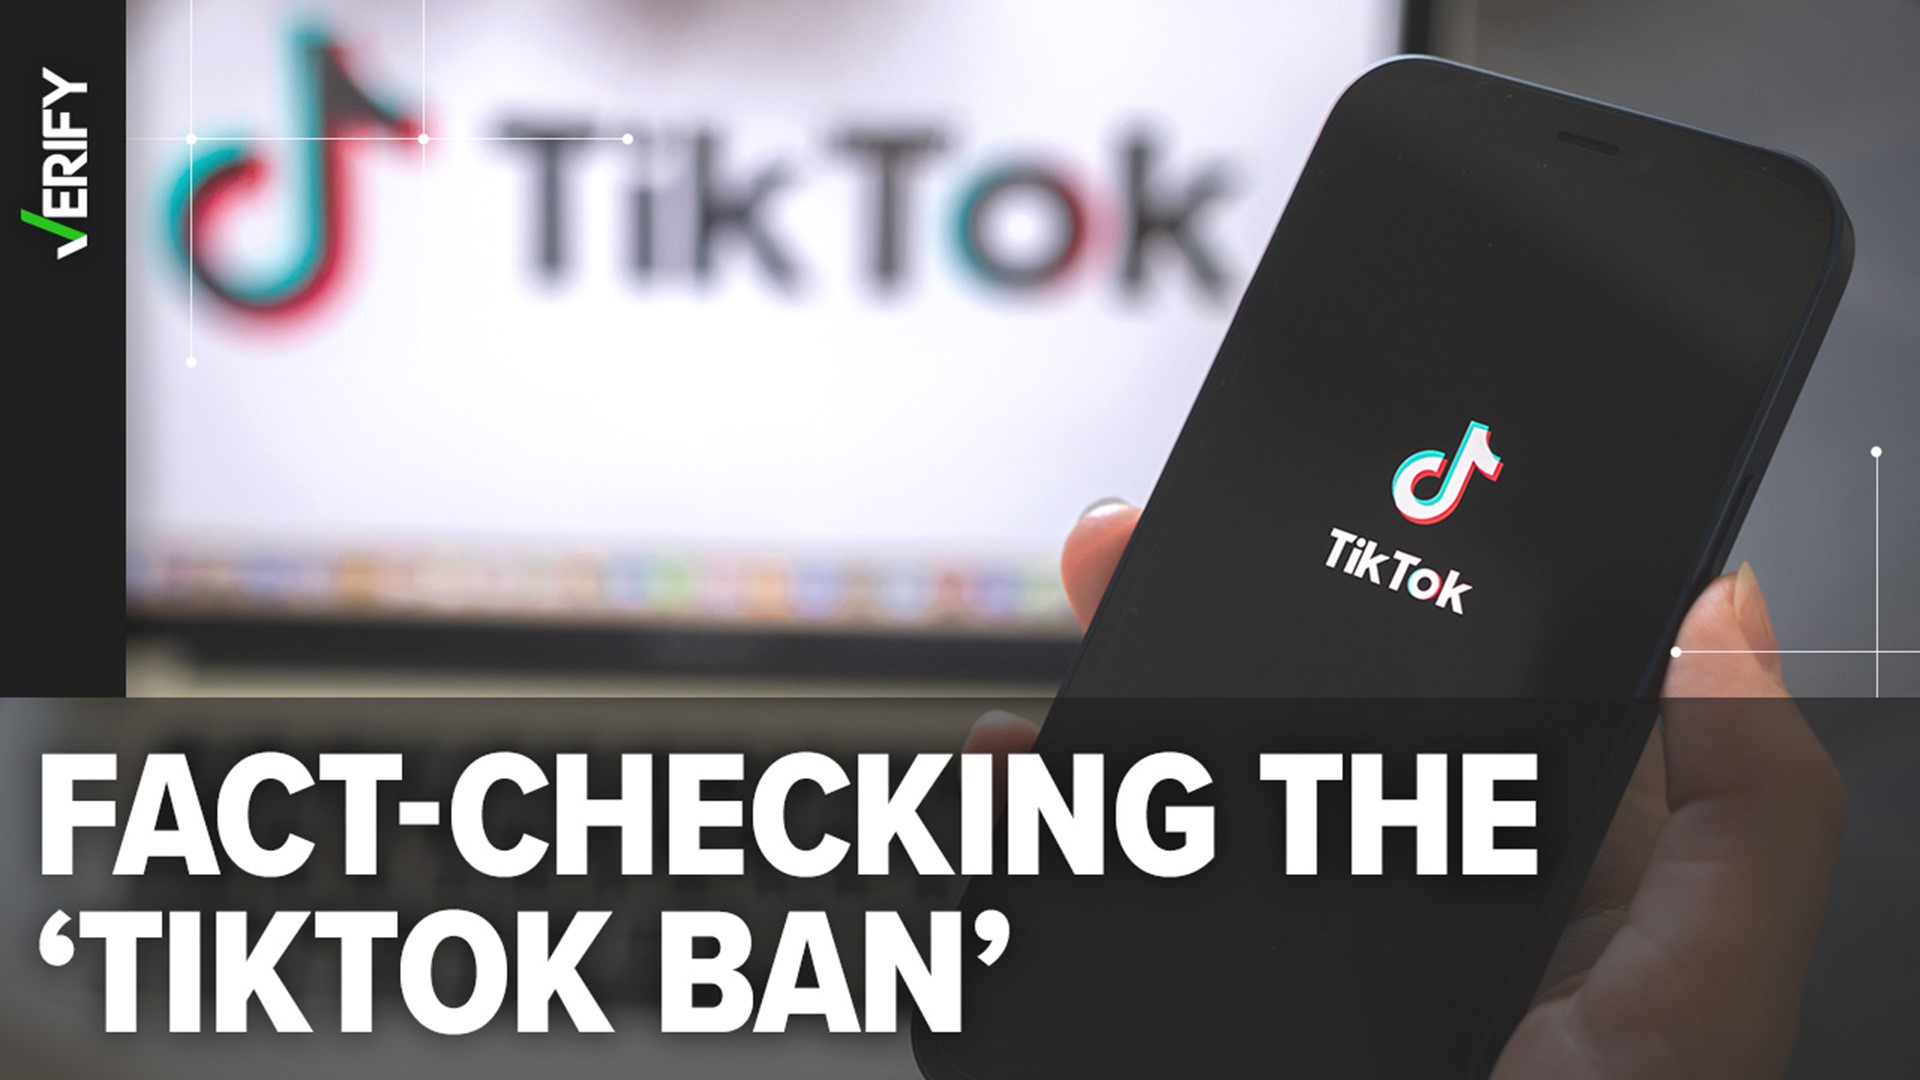 The House bill that passed did not officially ban the popular Chinese-owned social media app nor was it focused solely on TikTok.